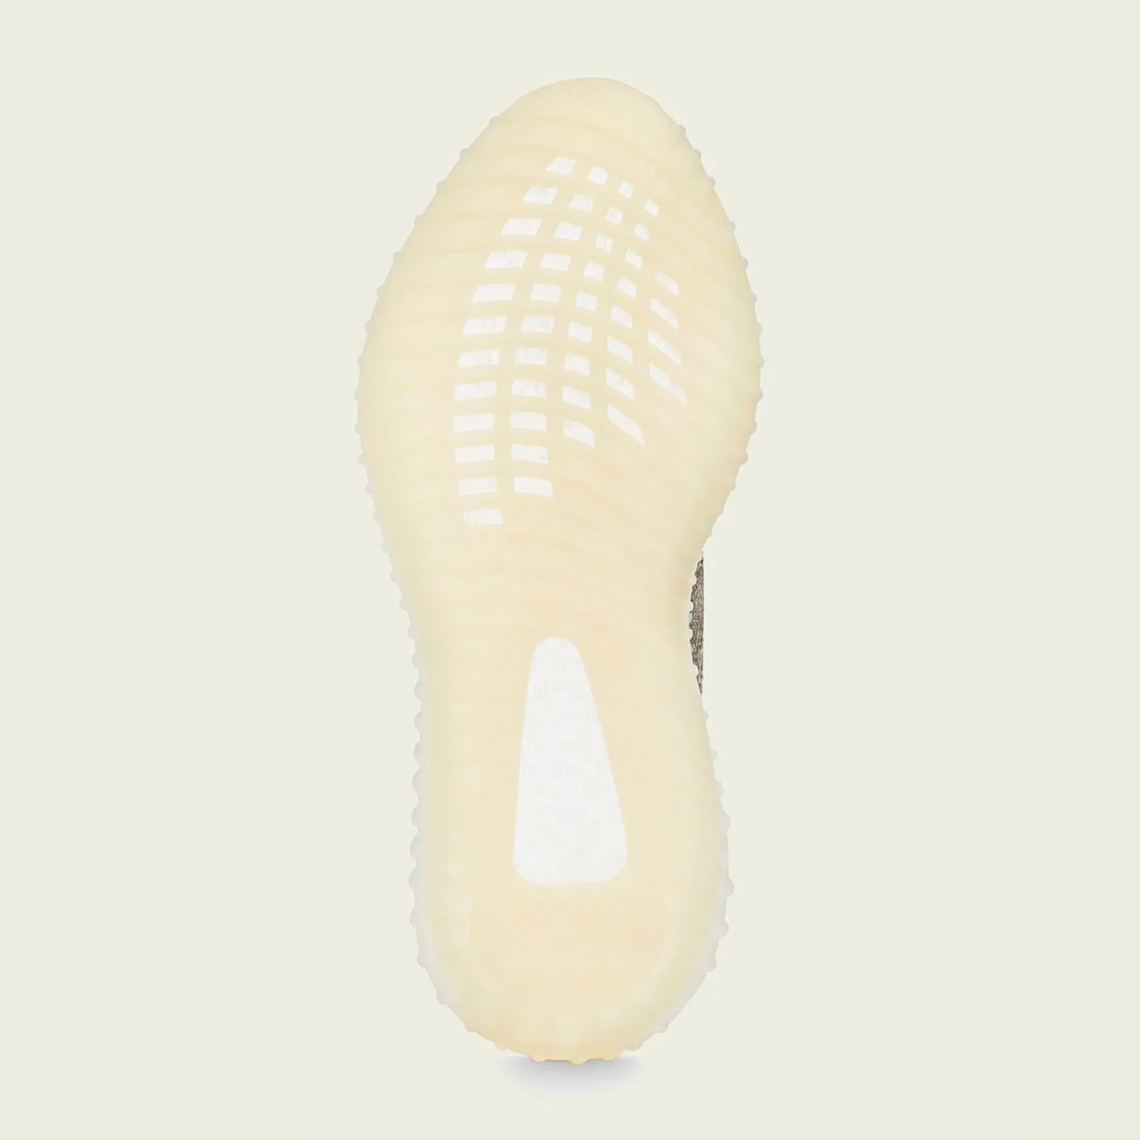 Adidas Yeezy Boost 350 V2 Zyon Fz1267 Official Images 3